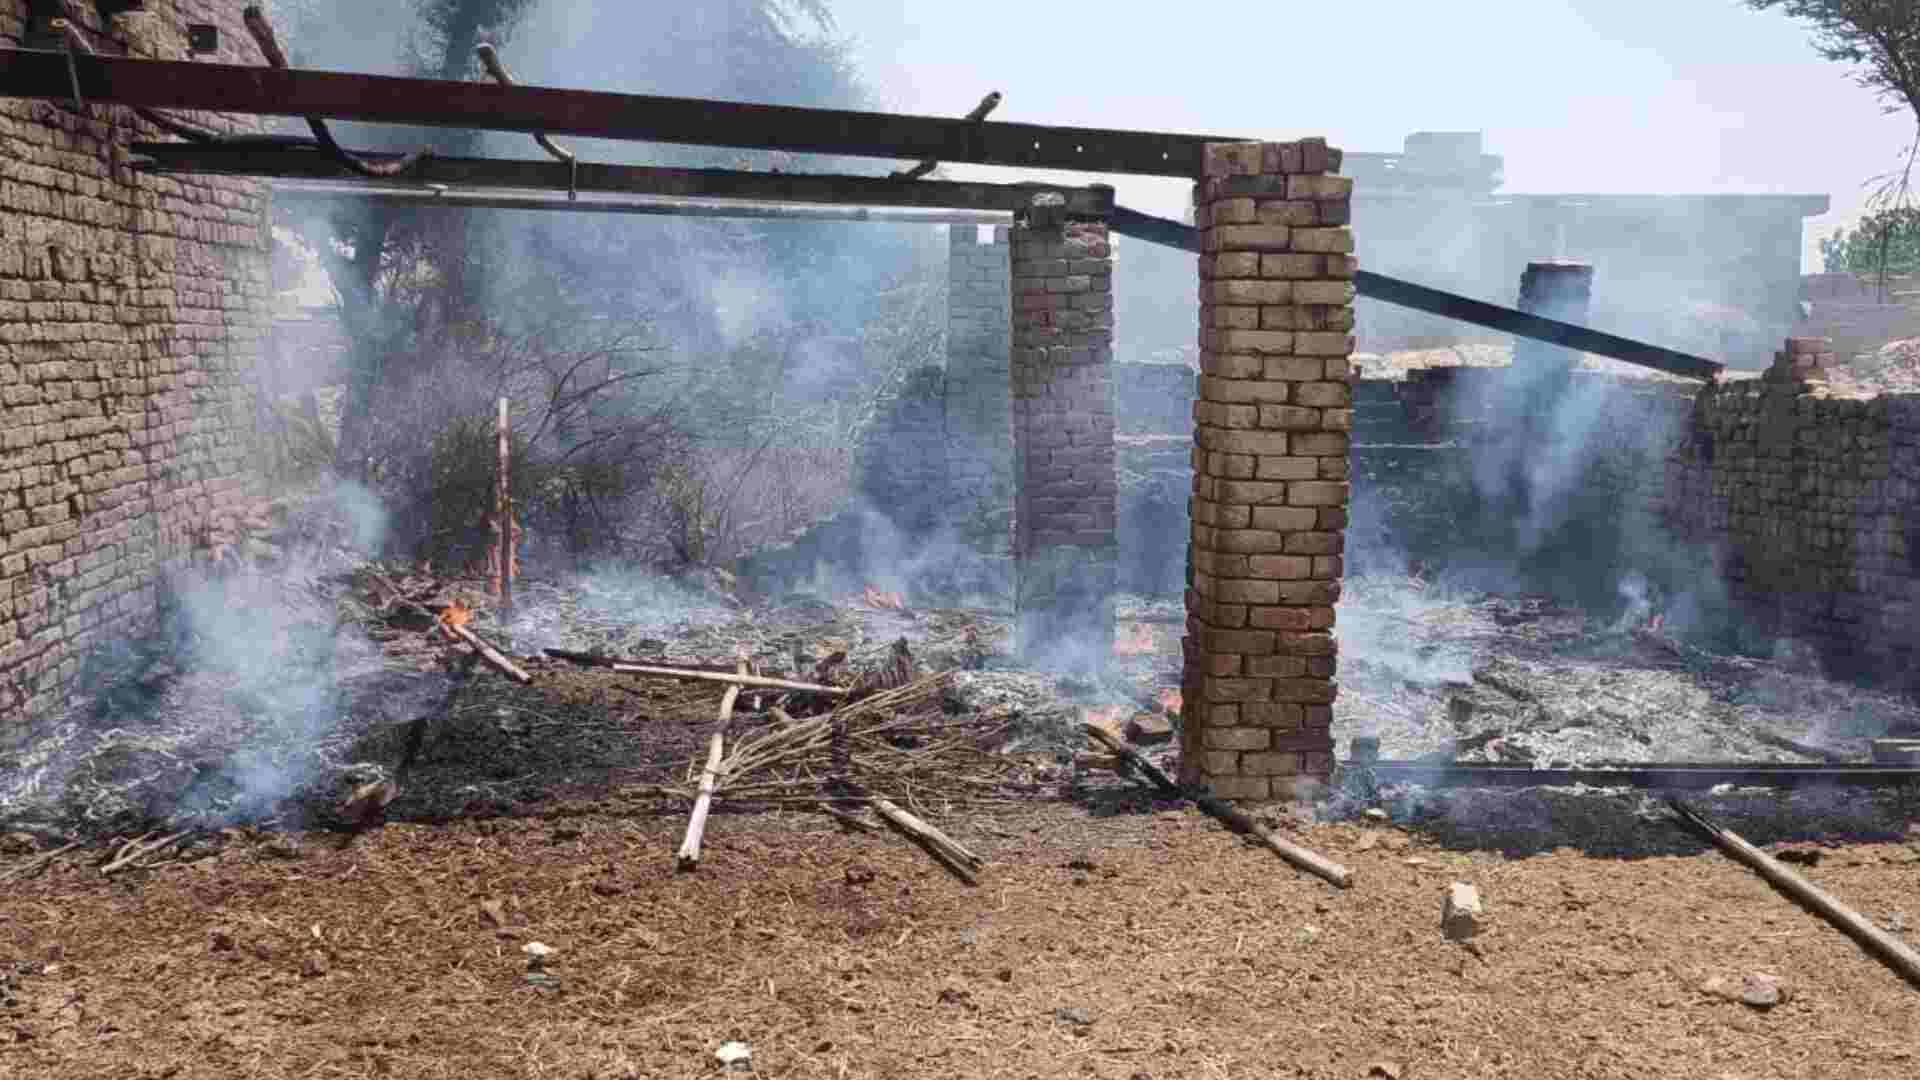 Rajasthan: Fire Breaks Out In Sriganganagar Cow Shed